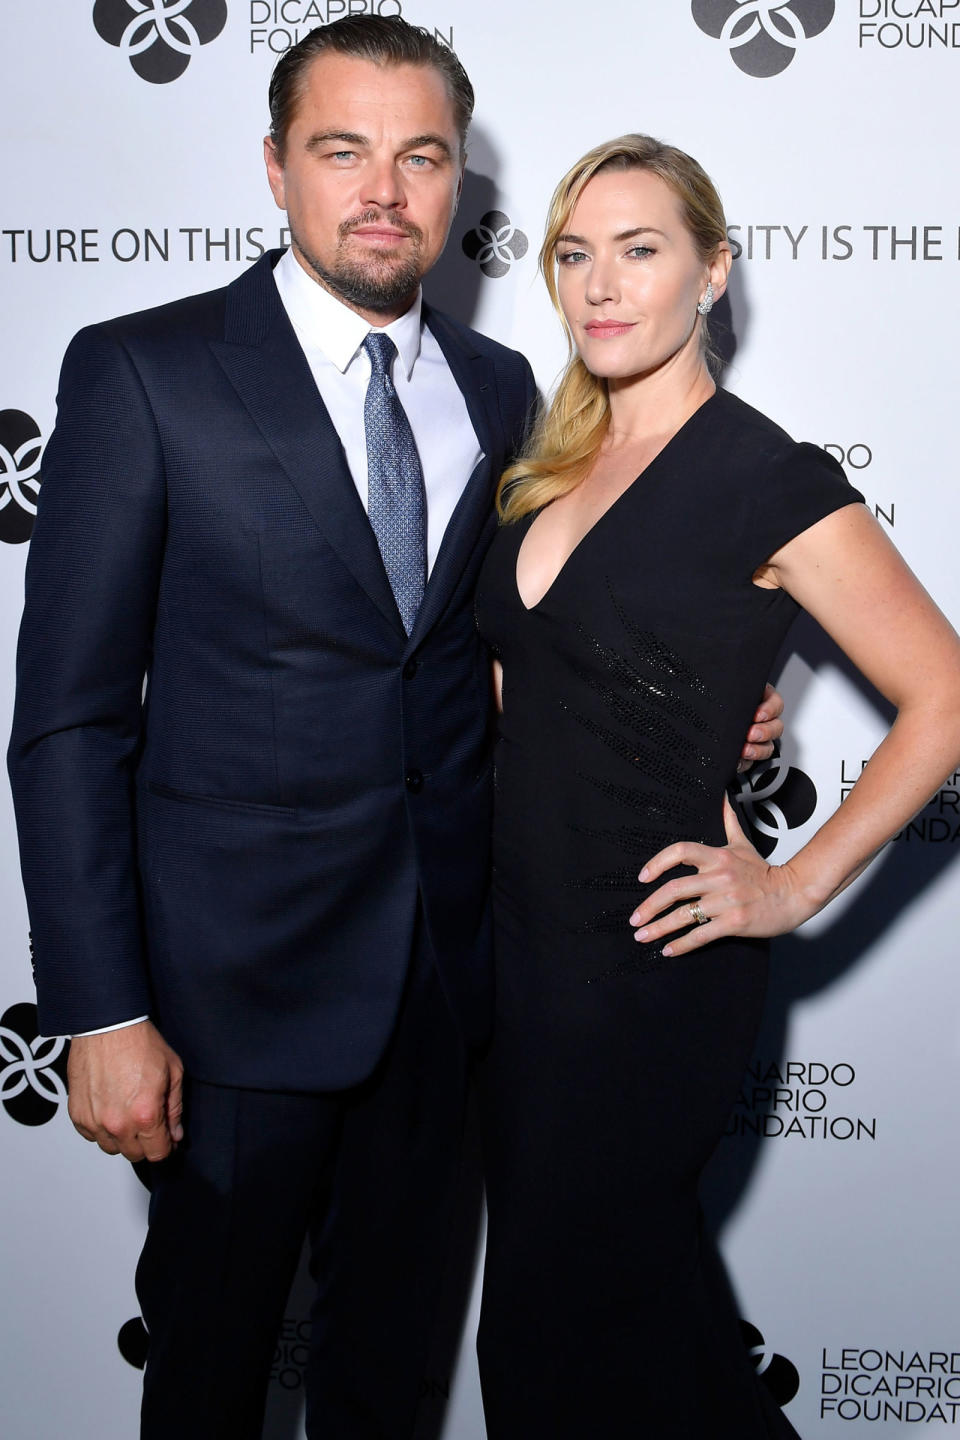 <p><strong>26 July</strong> Leonardo DiCaprio and Kate Winslet posed for cameras at DiCaprio's fourth annual Foundation gala in Saint-Tropez. Winslet wore a simple fitted black dress while diCaprio wore a smart navy suit. </p>